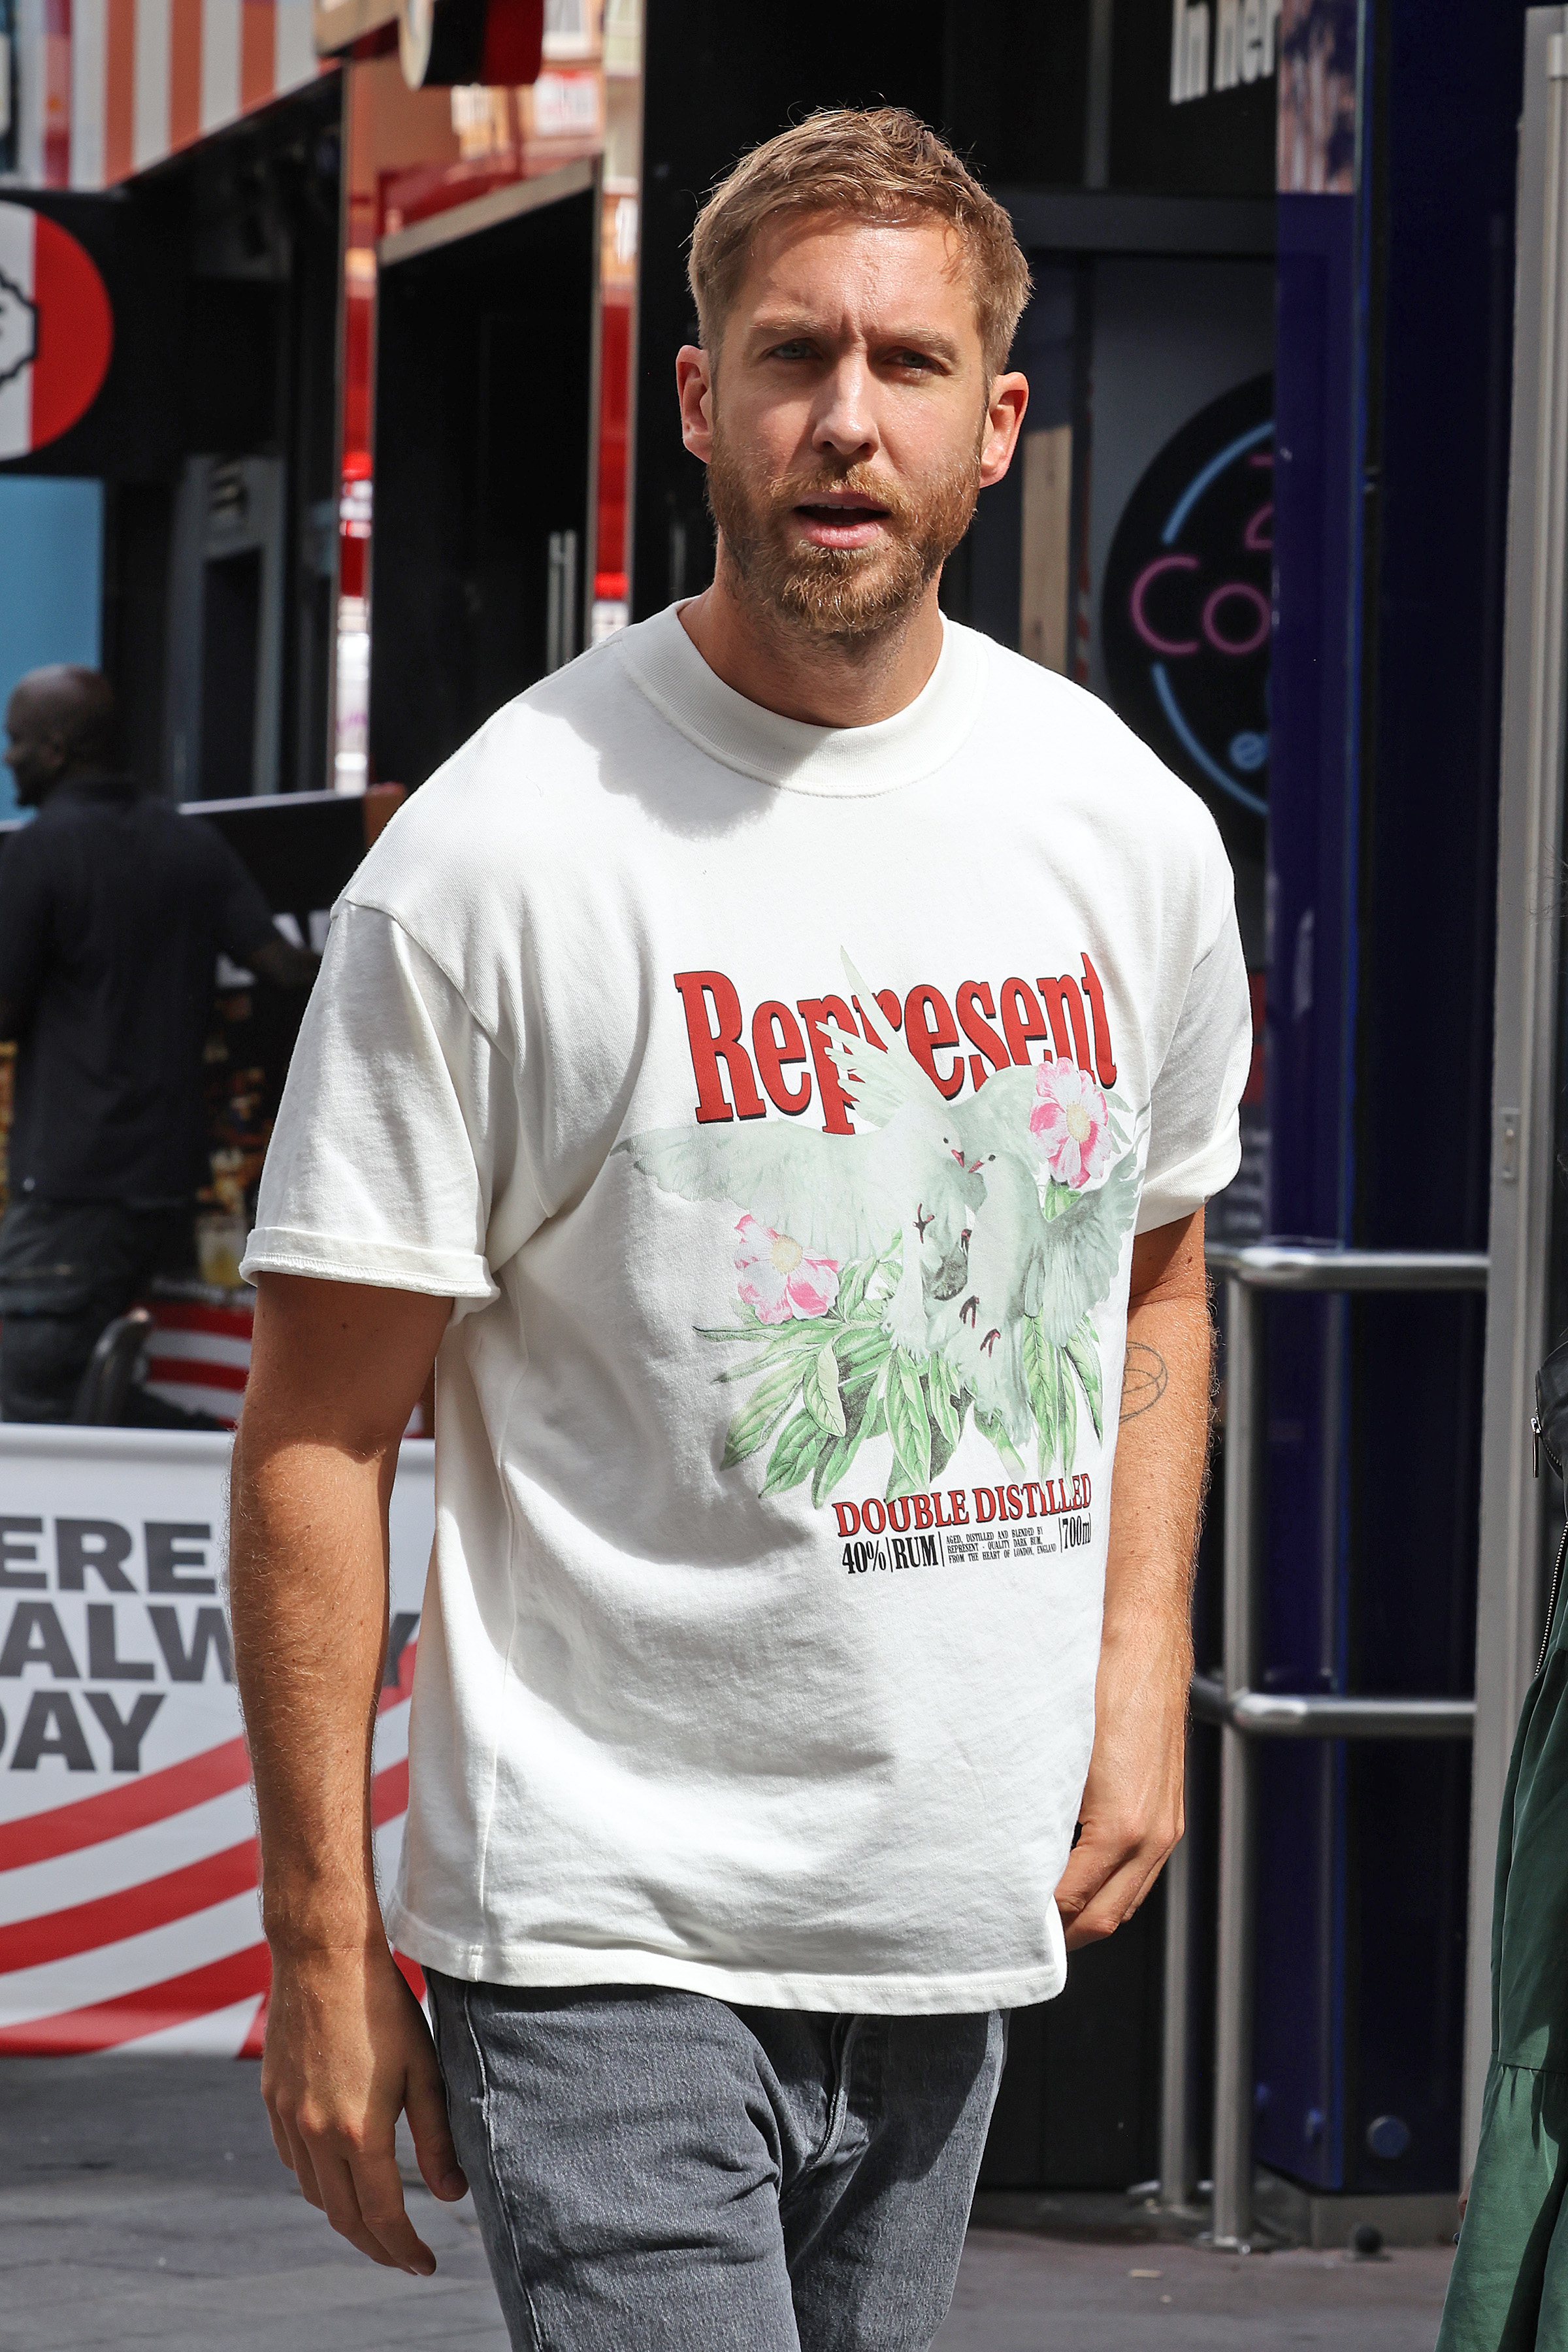 Close-up of Calvin/Adam in a &quot;Represent Double Distilled&quot; T-shirt and jeans